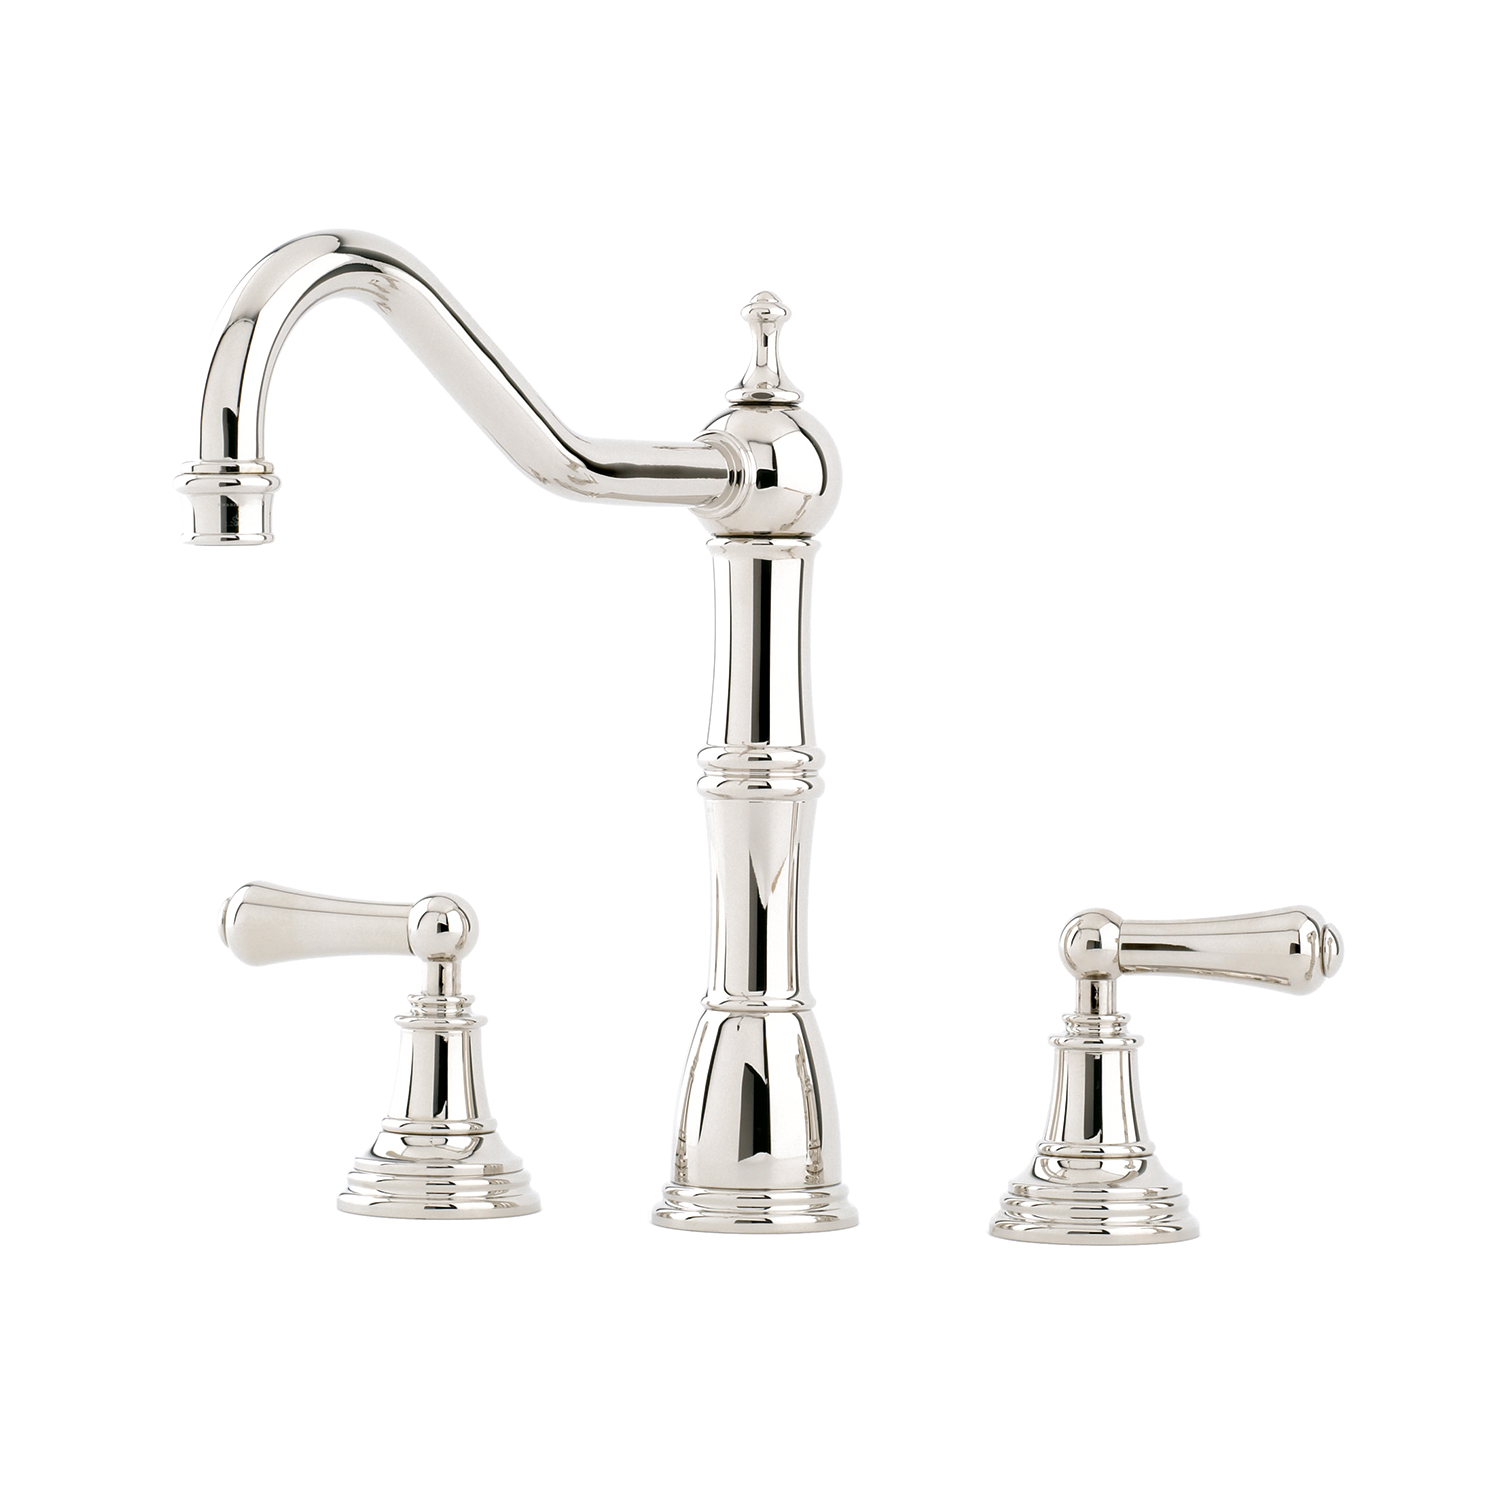 Provence 3 hole Sink Mixer with Lever Handles – Perrin & Rowe